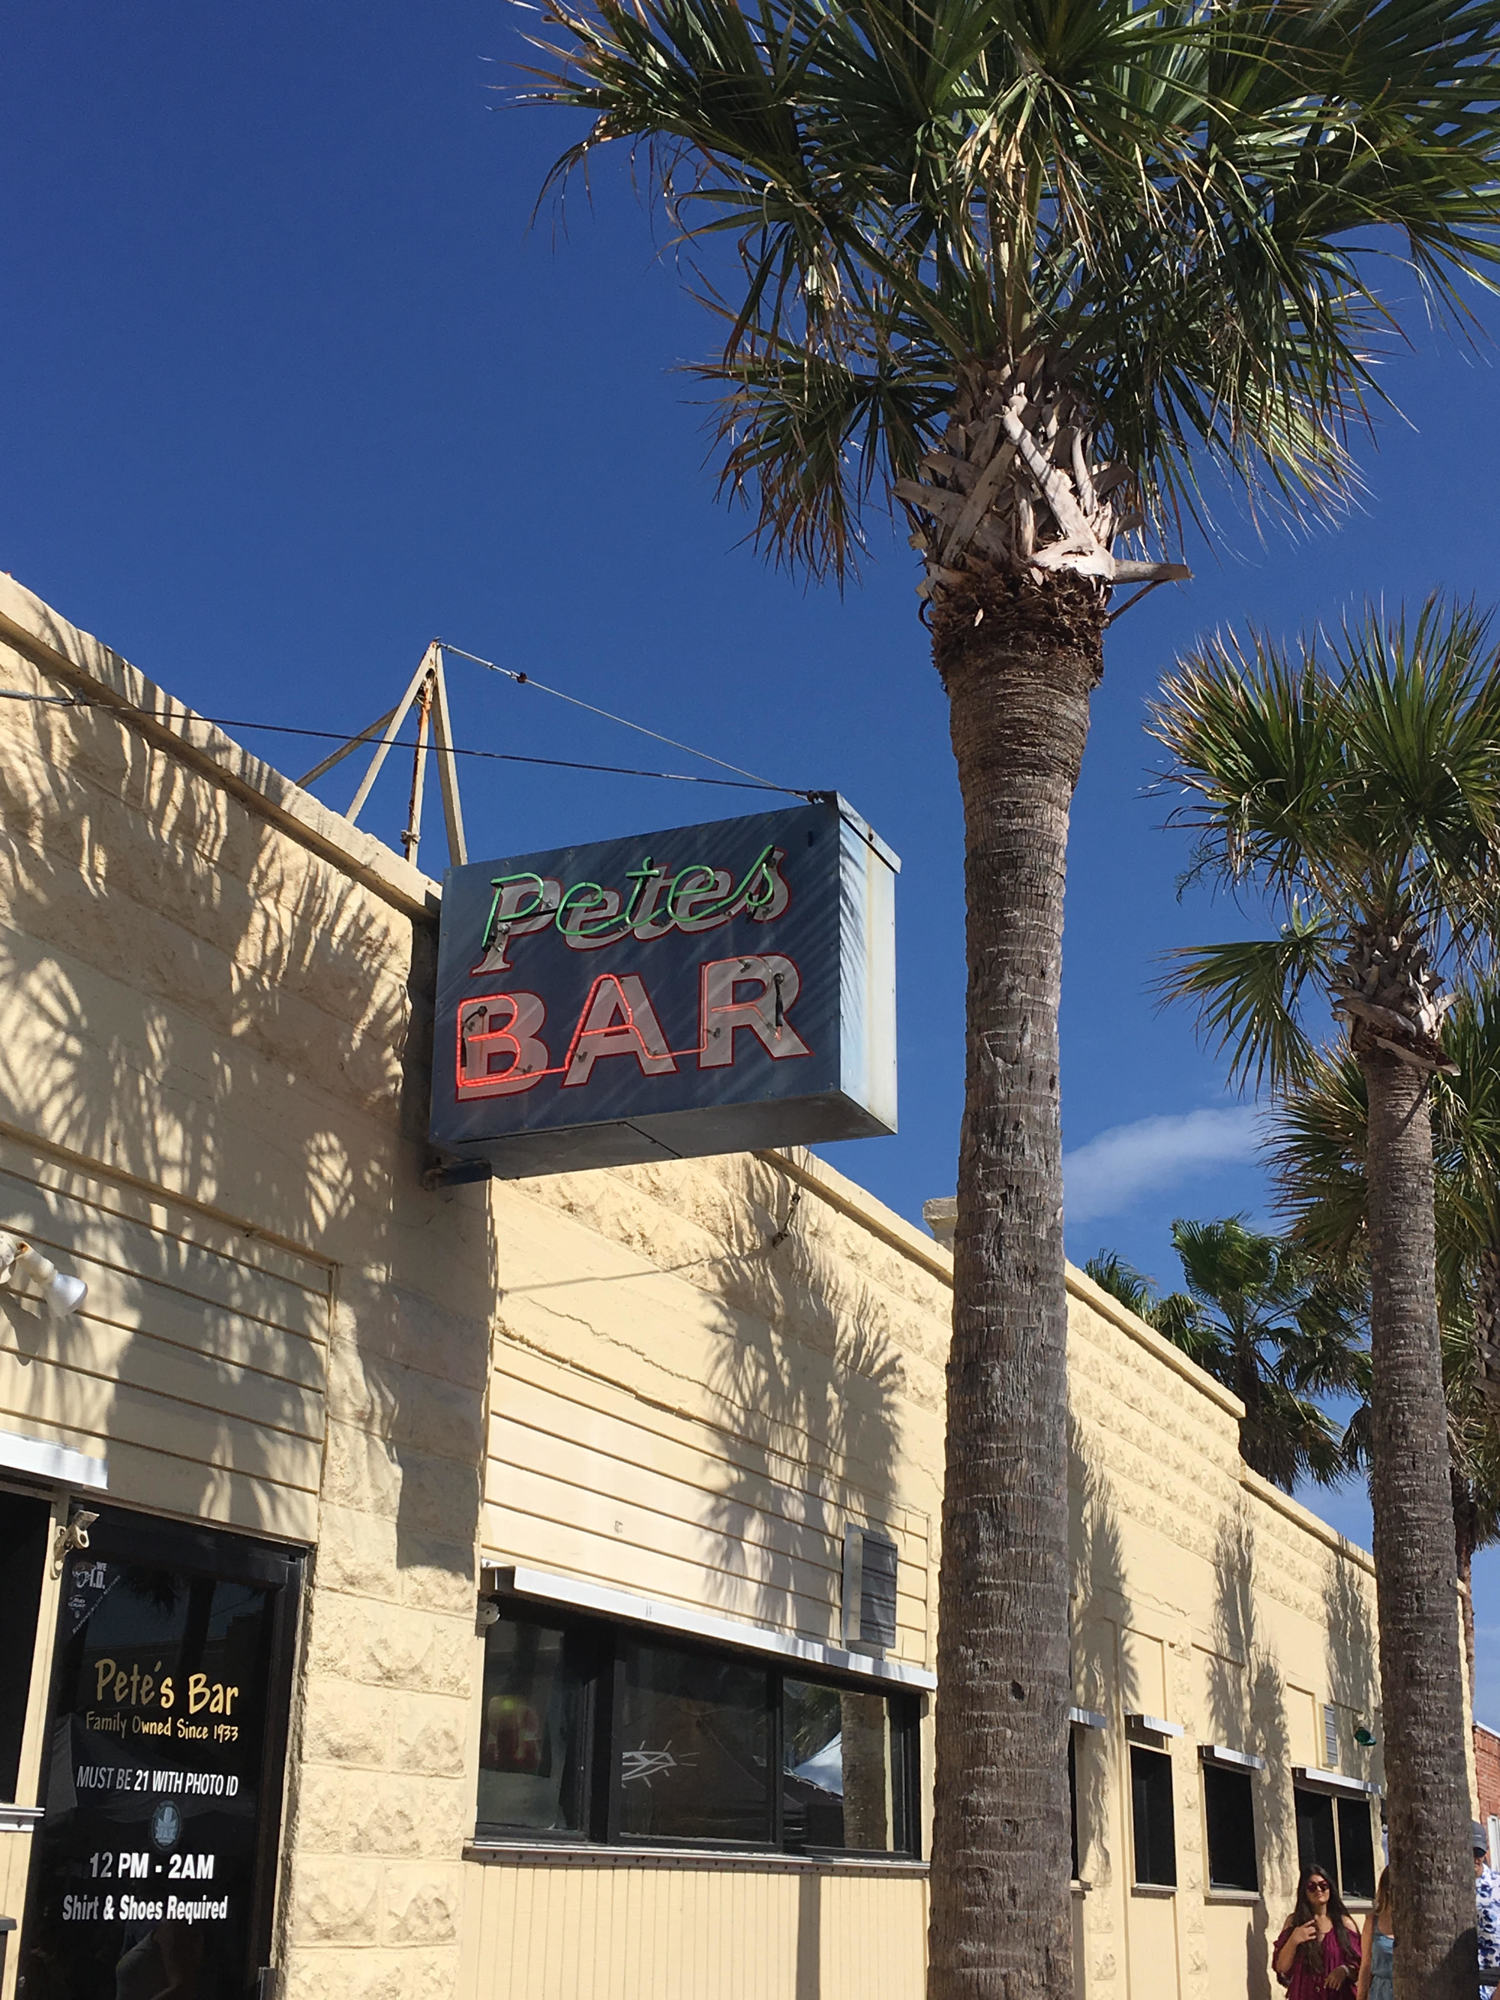 The sale includes the 4,189-square-foot bar, Pete’s liquor license, as well as surrounding properties that include two small houses on Lemon Street and three adjoining businesses – Shorelines, Rene’s Jewelry and Bar-B-Q Sticks.